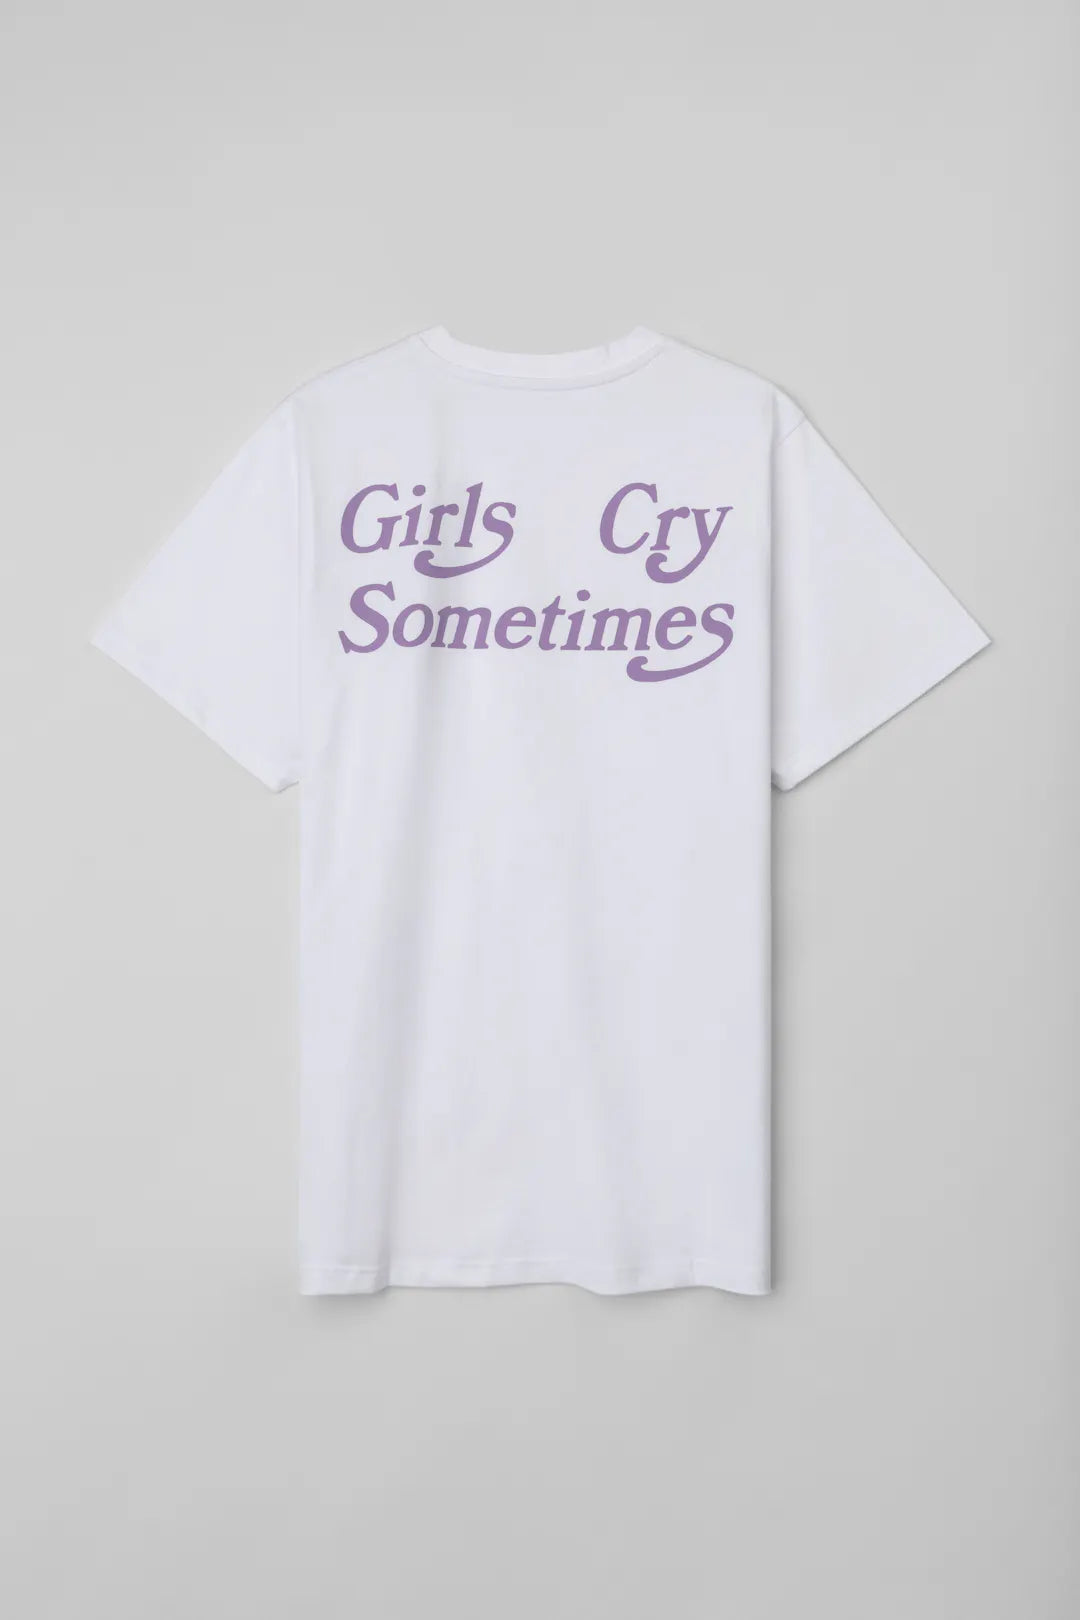 Pica Pica Girls Cry Sometimes T-Shirt